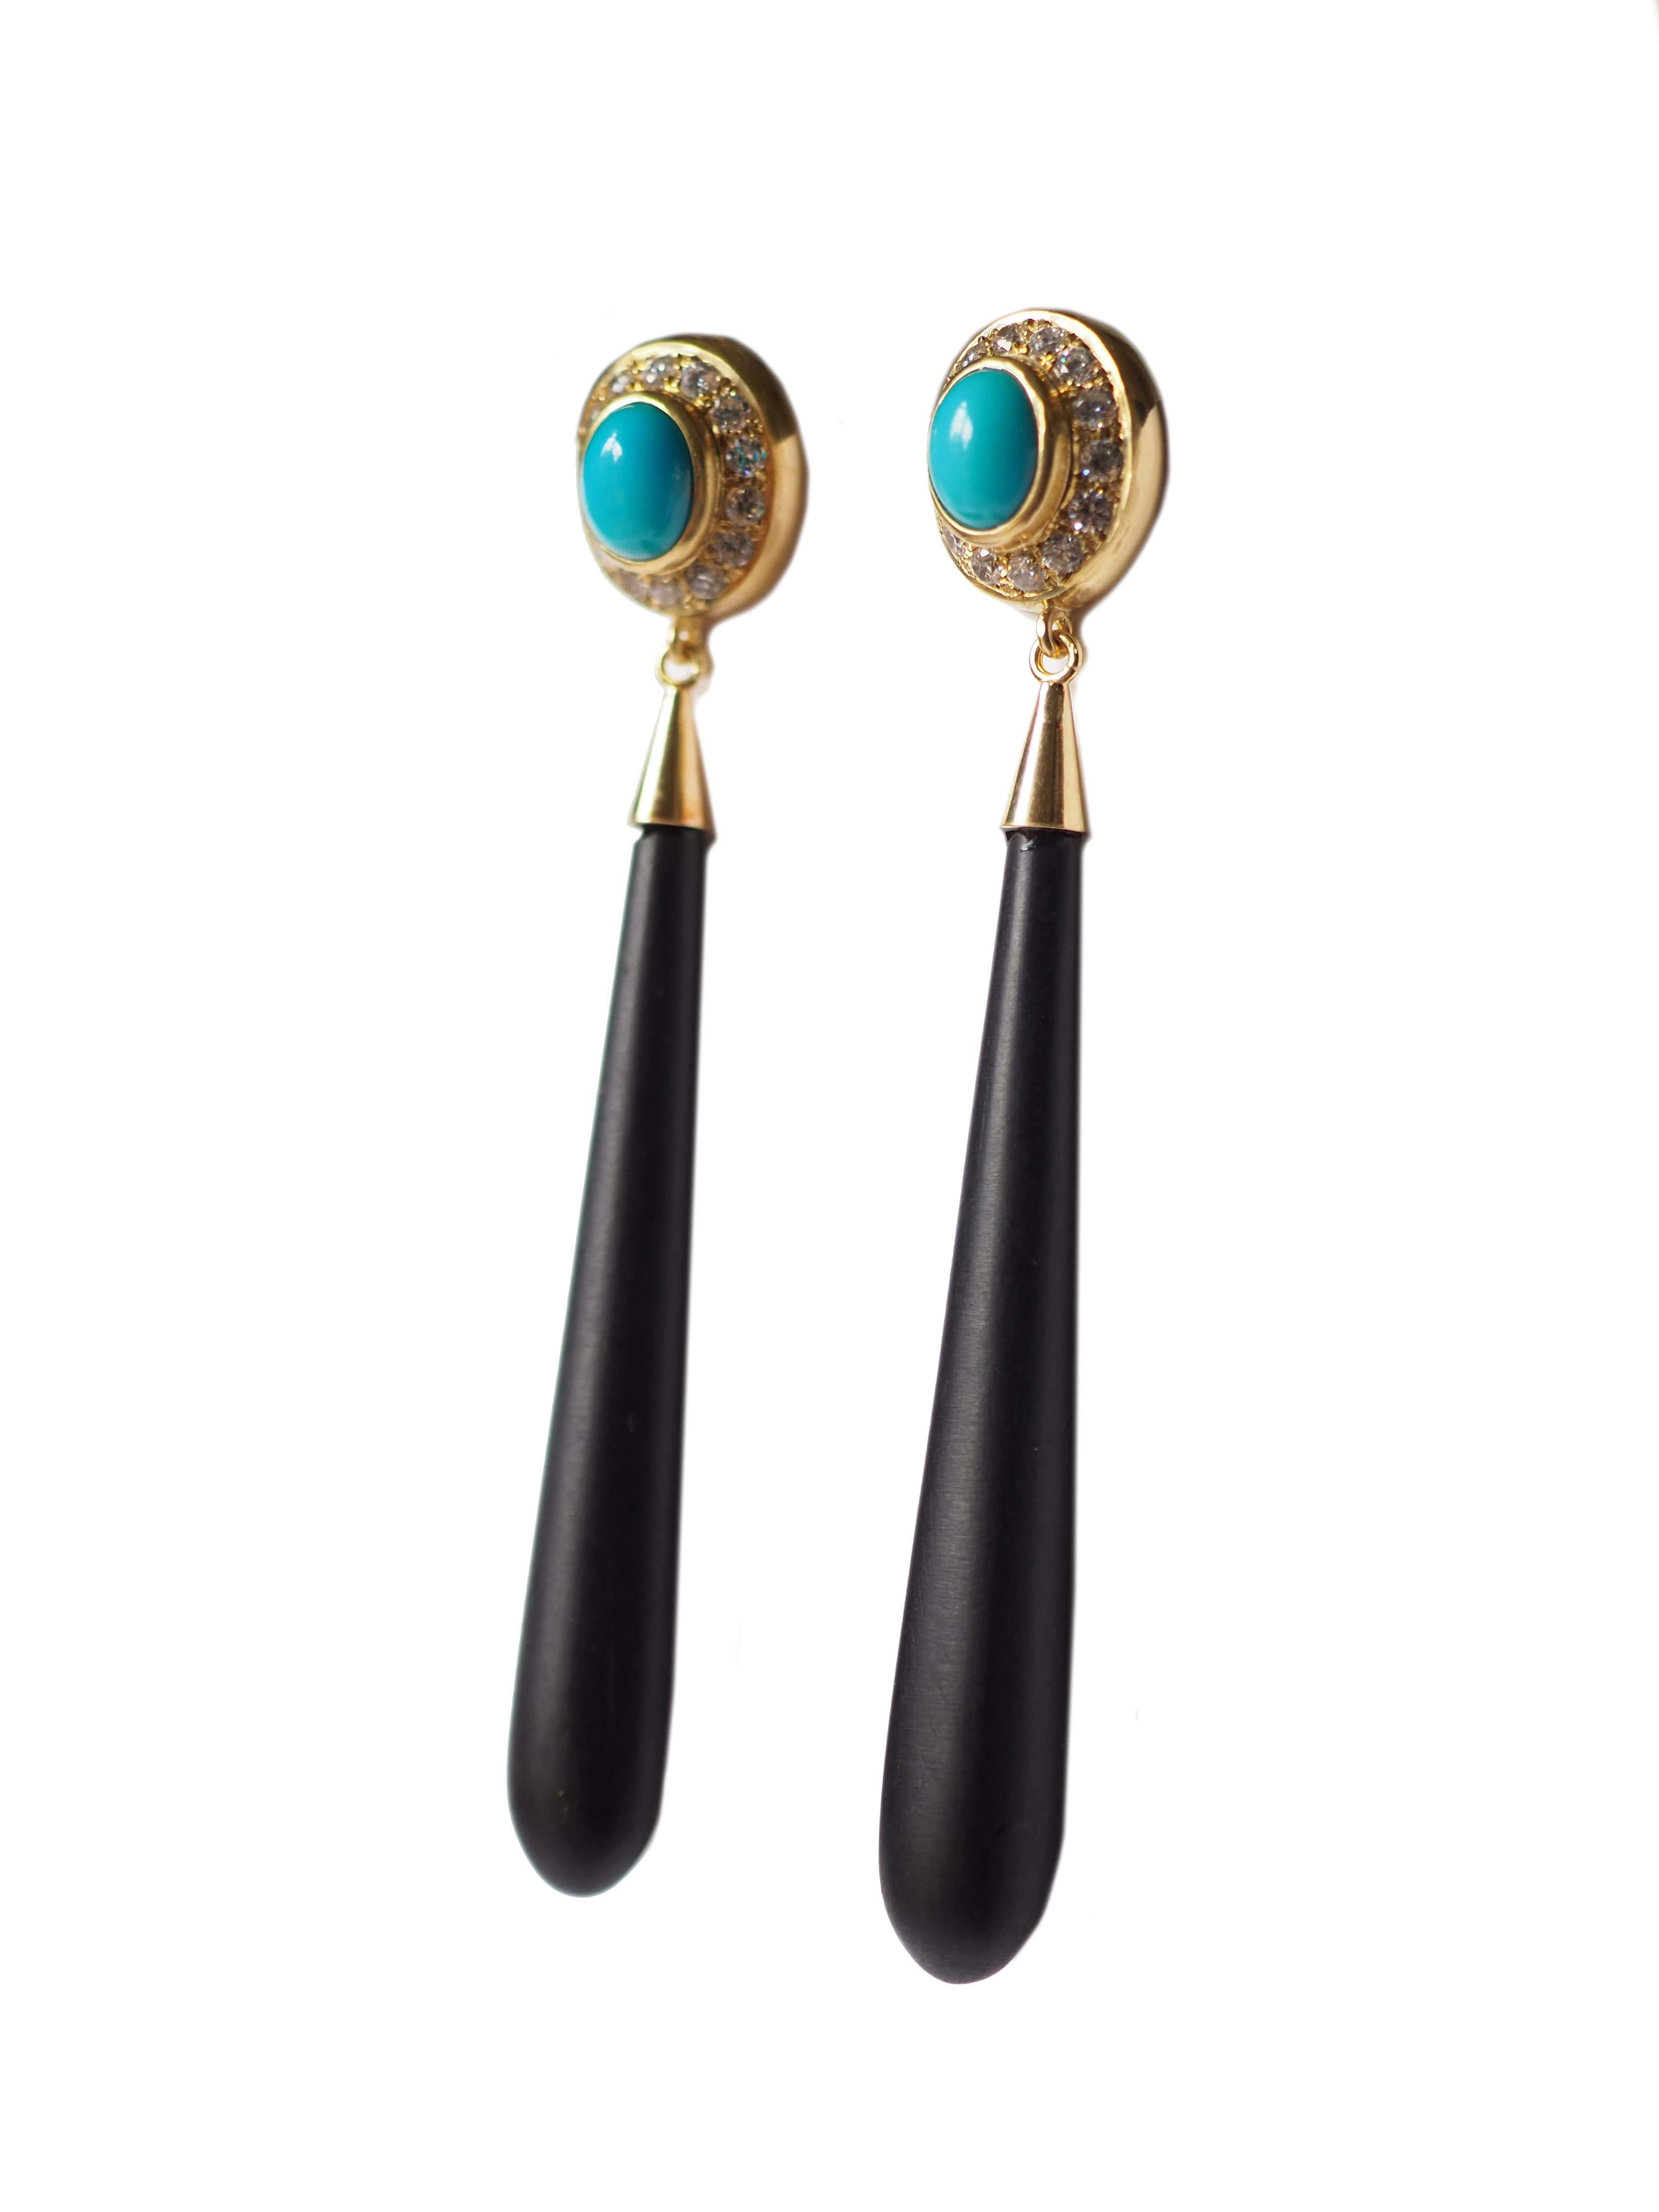 Long drop Ebony Earrings 18 kt Gold 9,80 gr Turquoise Zircon measure 8cm.
All Giulia Colussi jewelry is new and has never been previously owned or worn. Each item will arrive at your door beautifully gift wrapped in our boxes, put inside an elegant